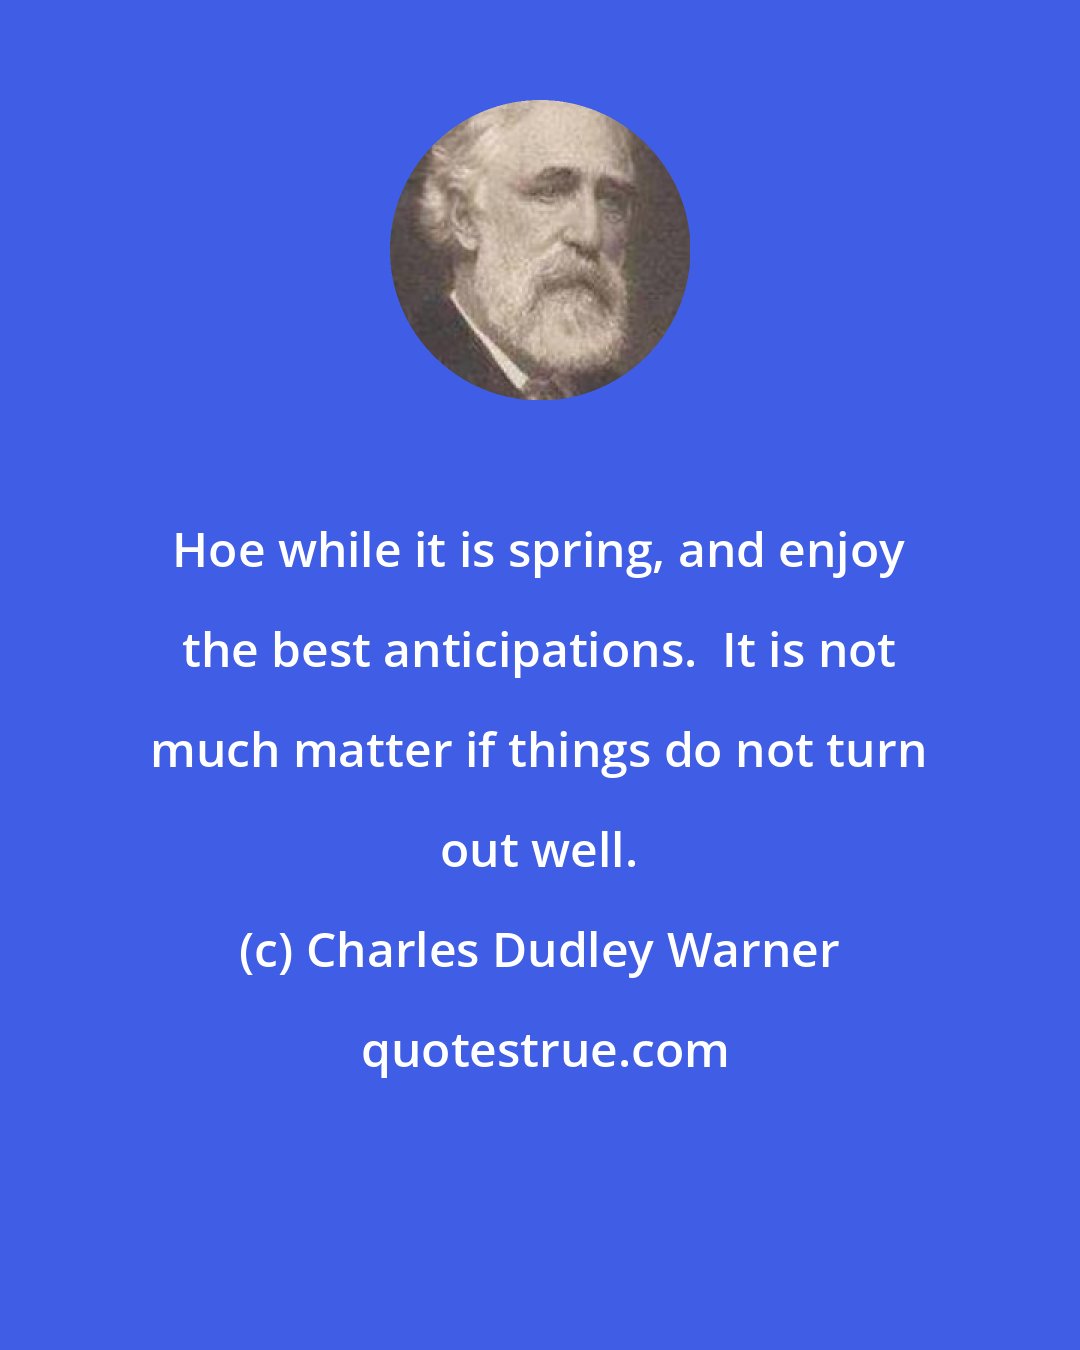 Charles Dudley Warner: Hoe while it is spring, and enjoy the best anticipations.  It is not much matter if things do not turn out well.